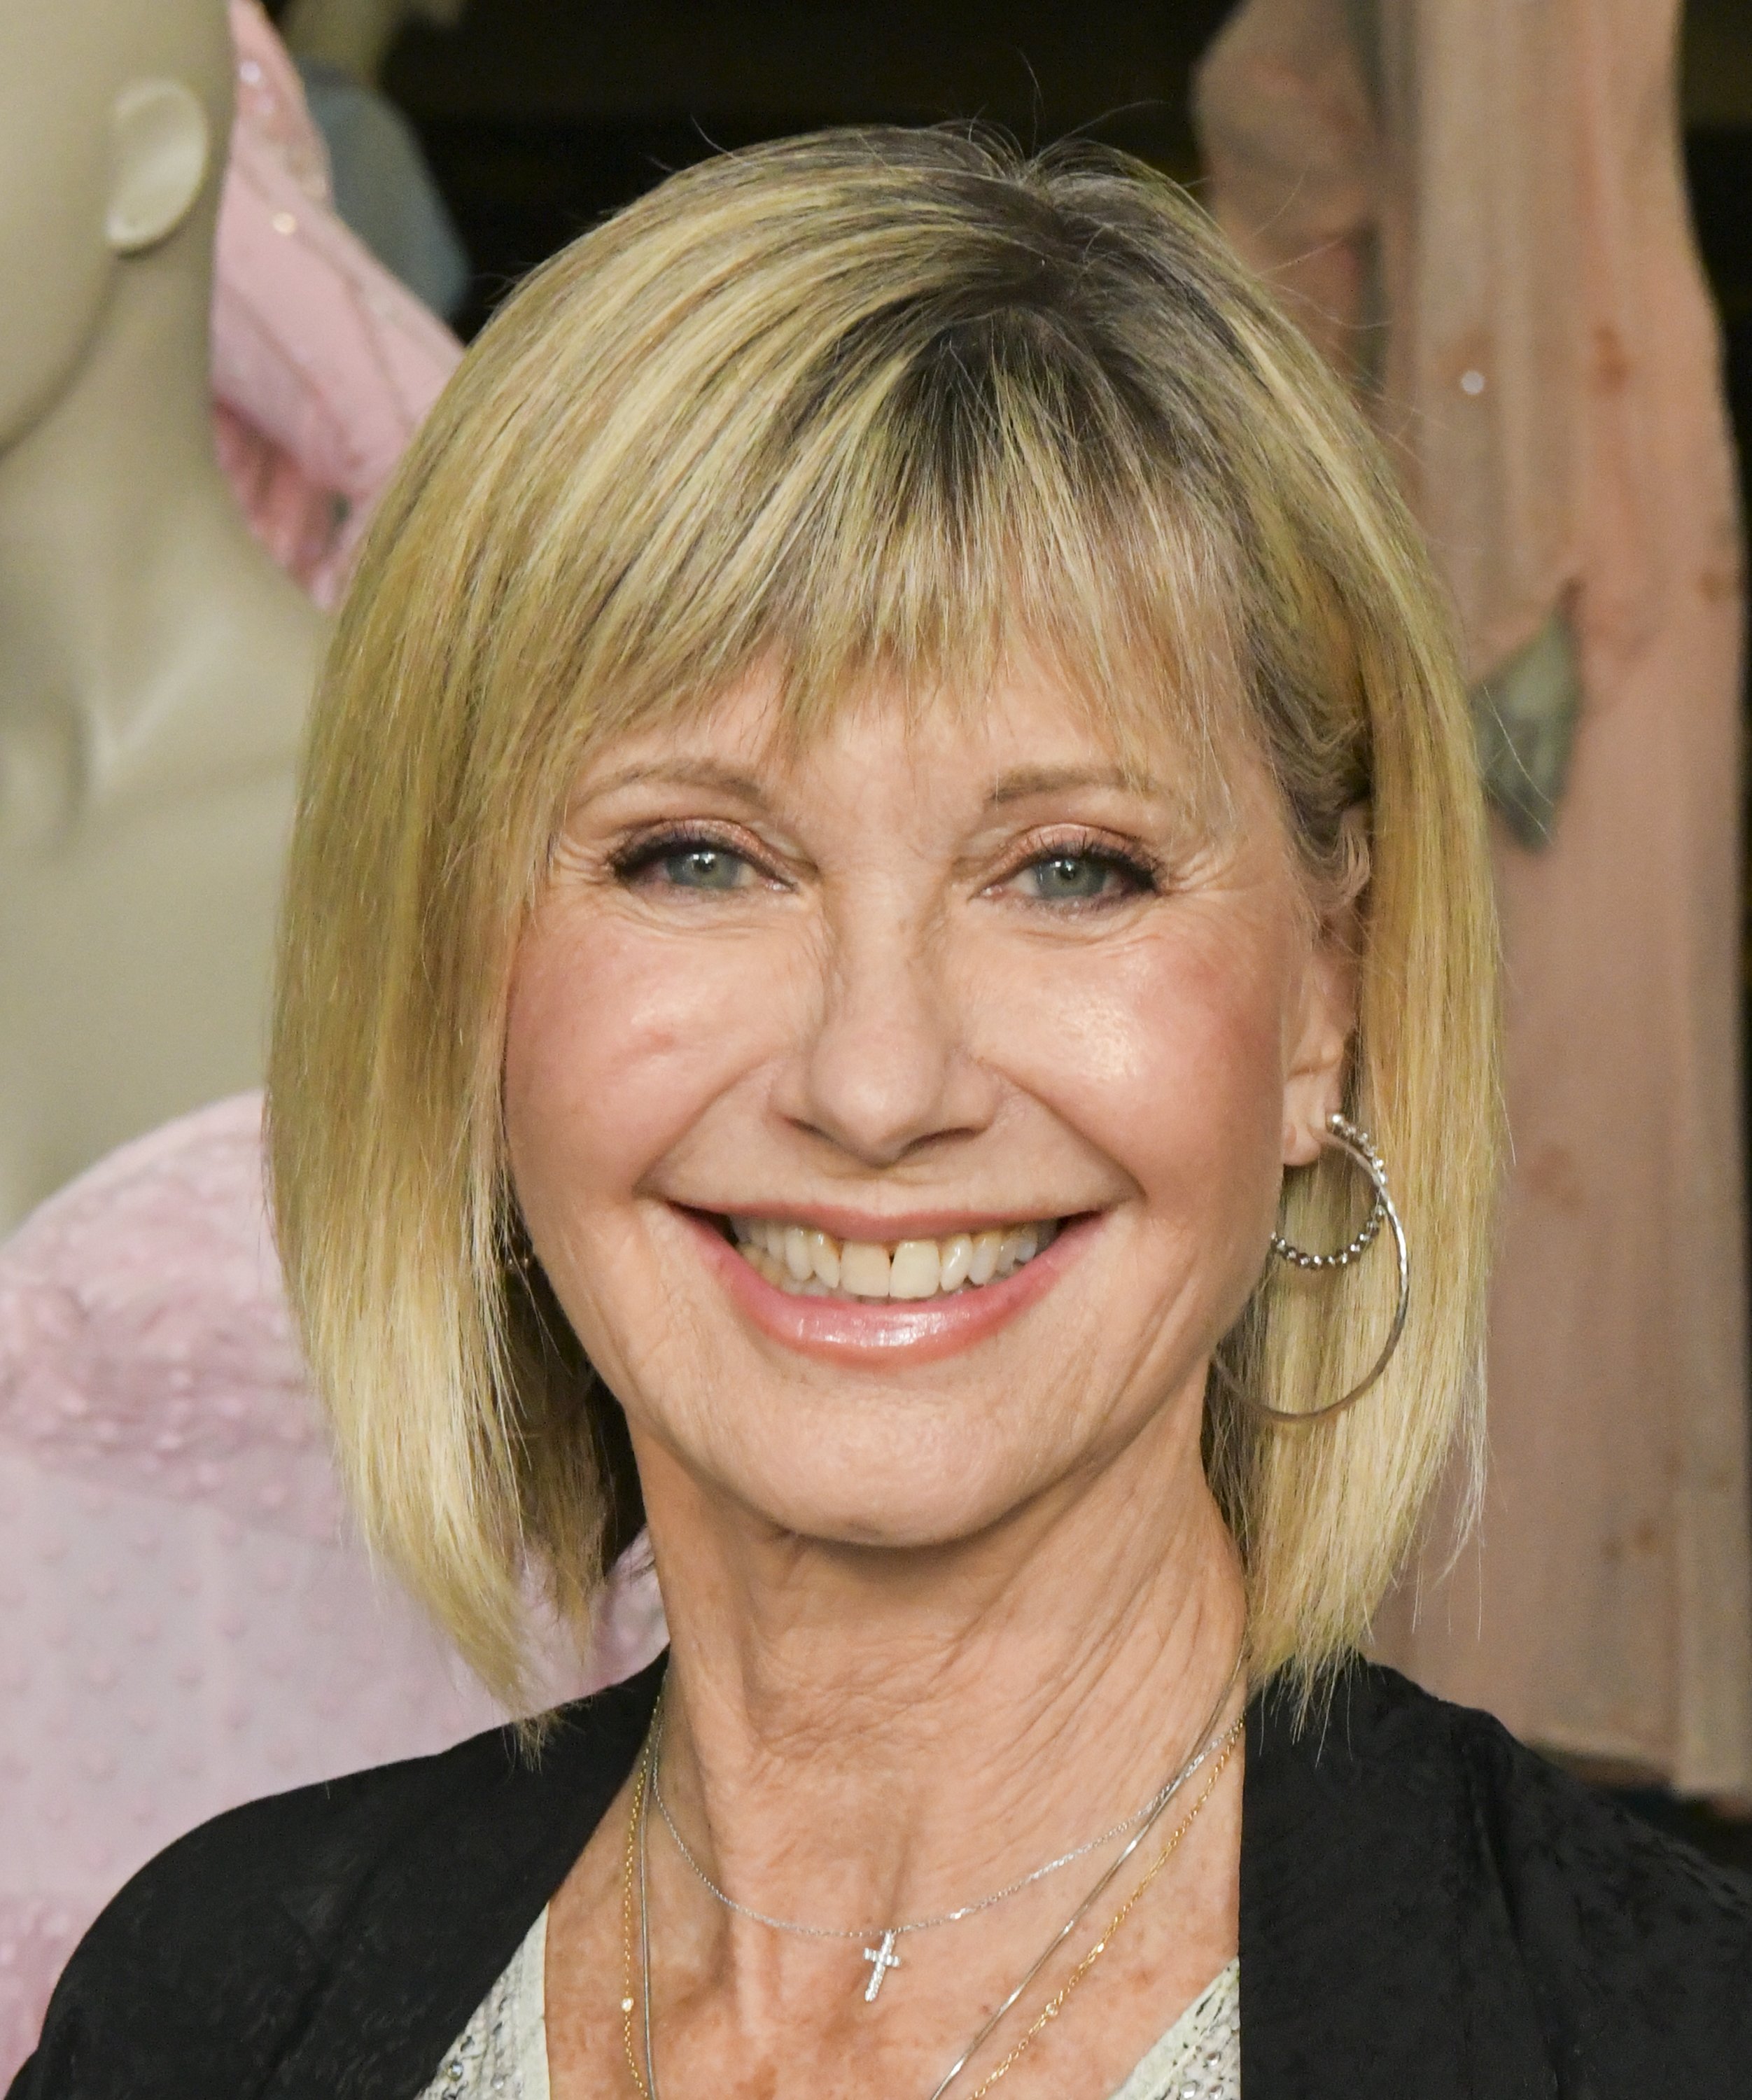 Olivia Newton-John attends the VIP reception for upcoming "Property of Olivia Newton-John Auction Event at Julien's Auctions on October 29, 2019, in Beverly Hills, California. | Source: Getty Images